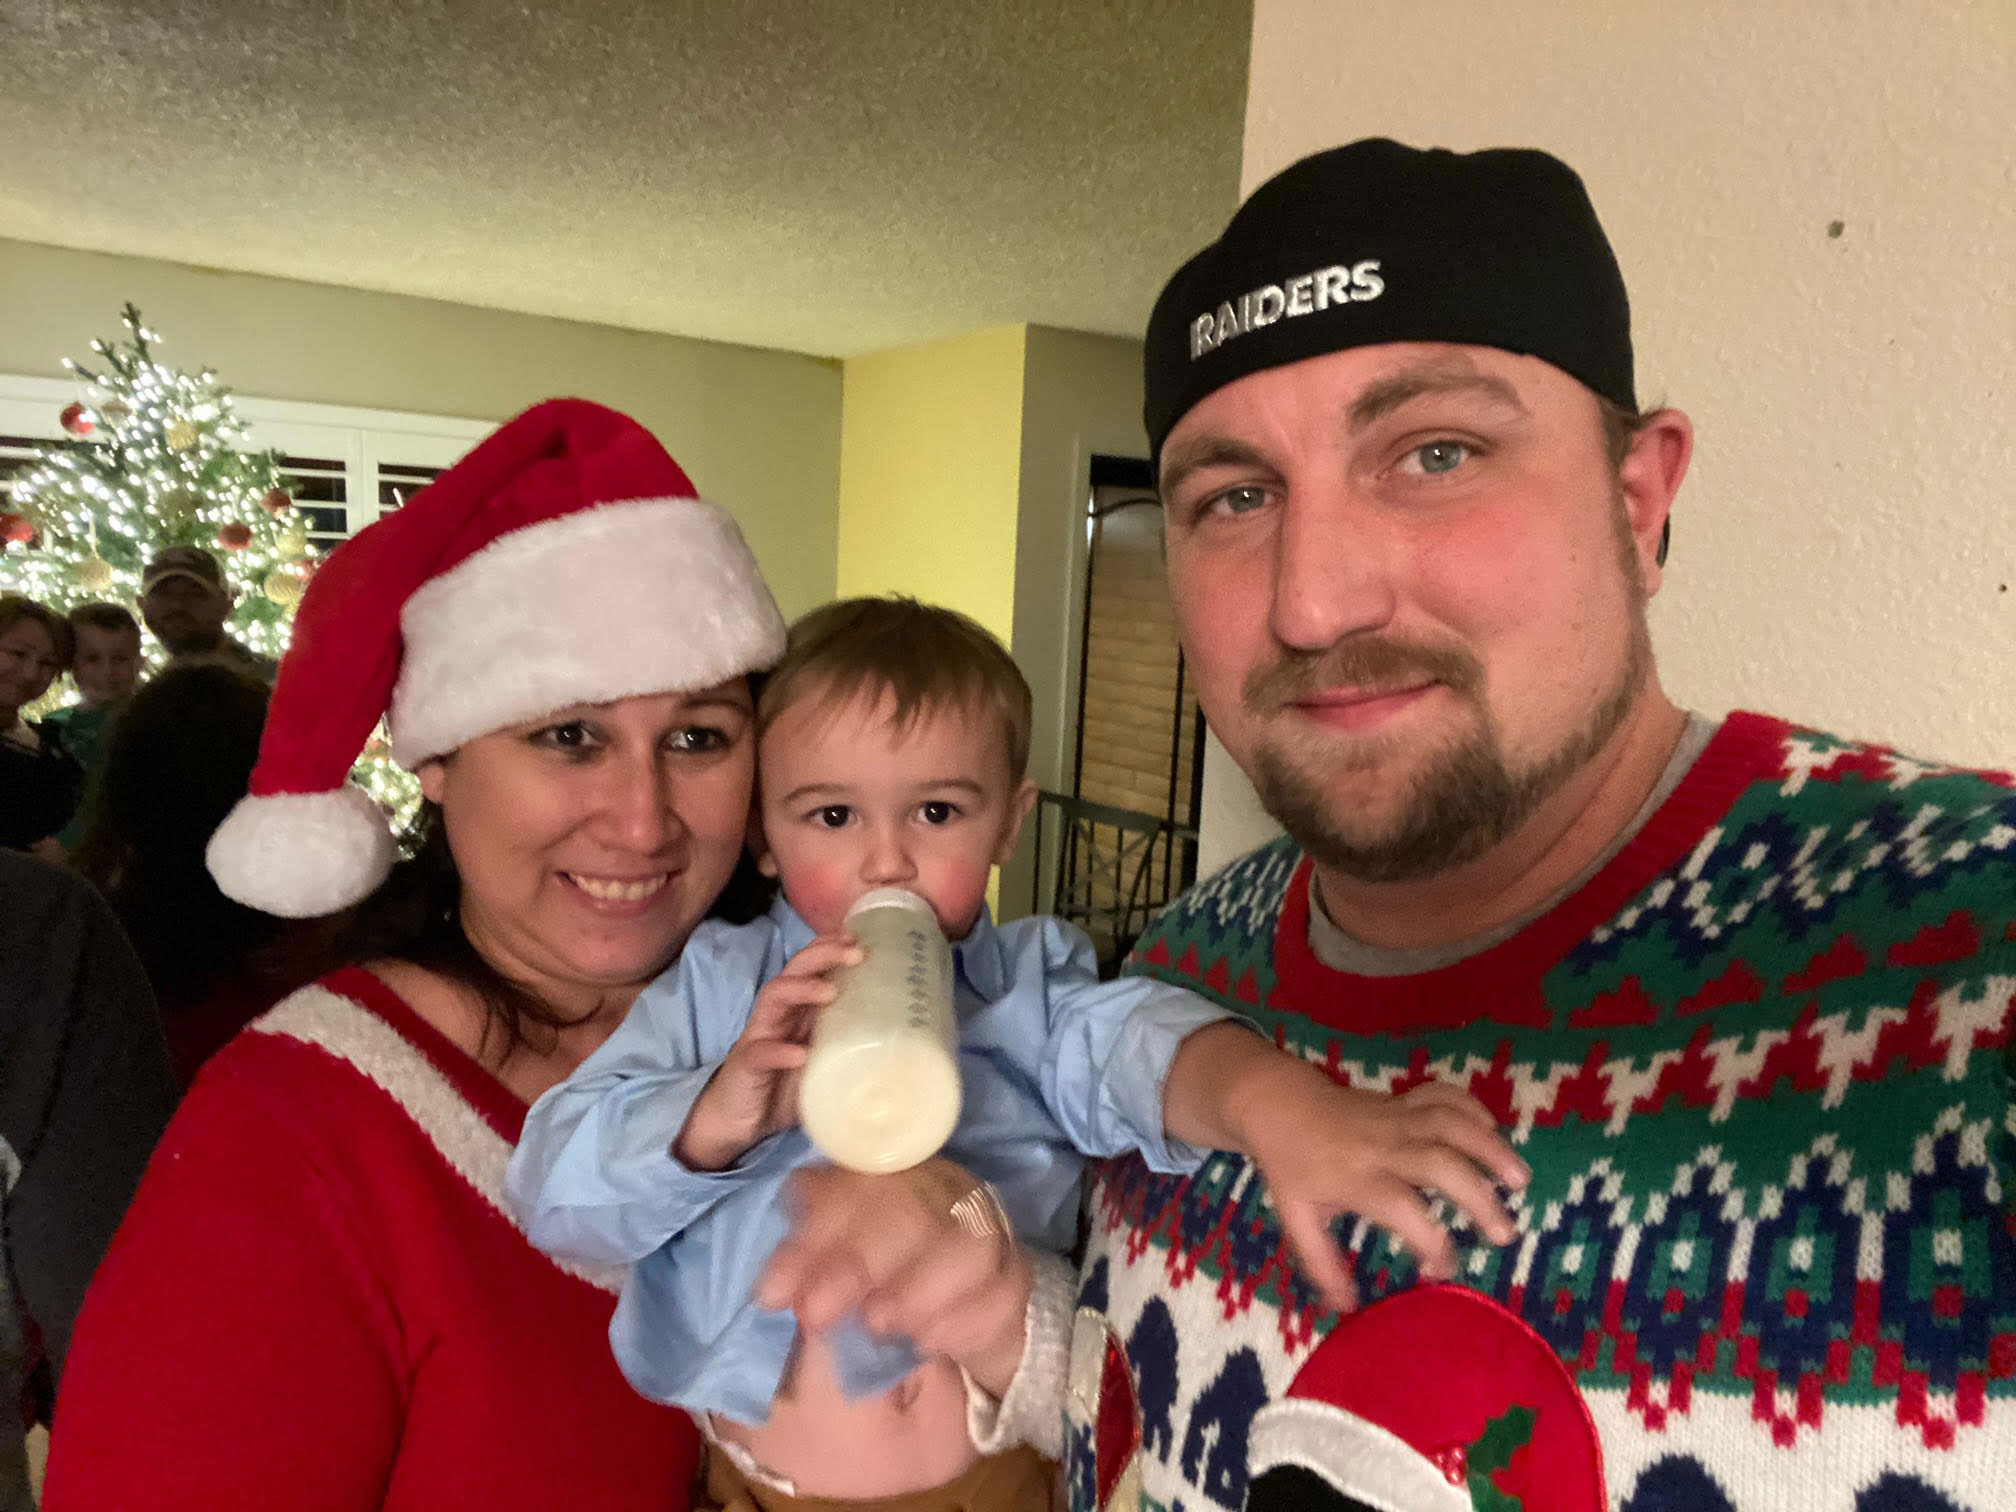 Dad, wearing a Raiders hat and Christmas sweater, Mom, wearing a Santa cap and red top, and their toddler son drinking from a bottle pose for a holiday photo